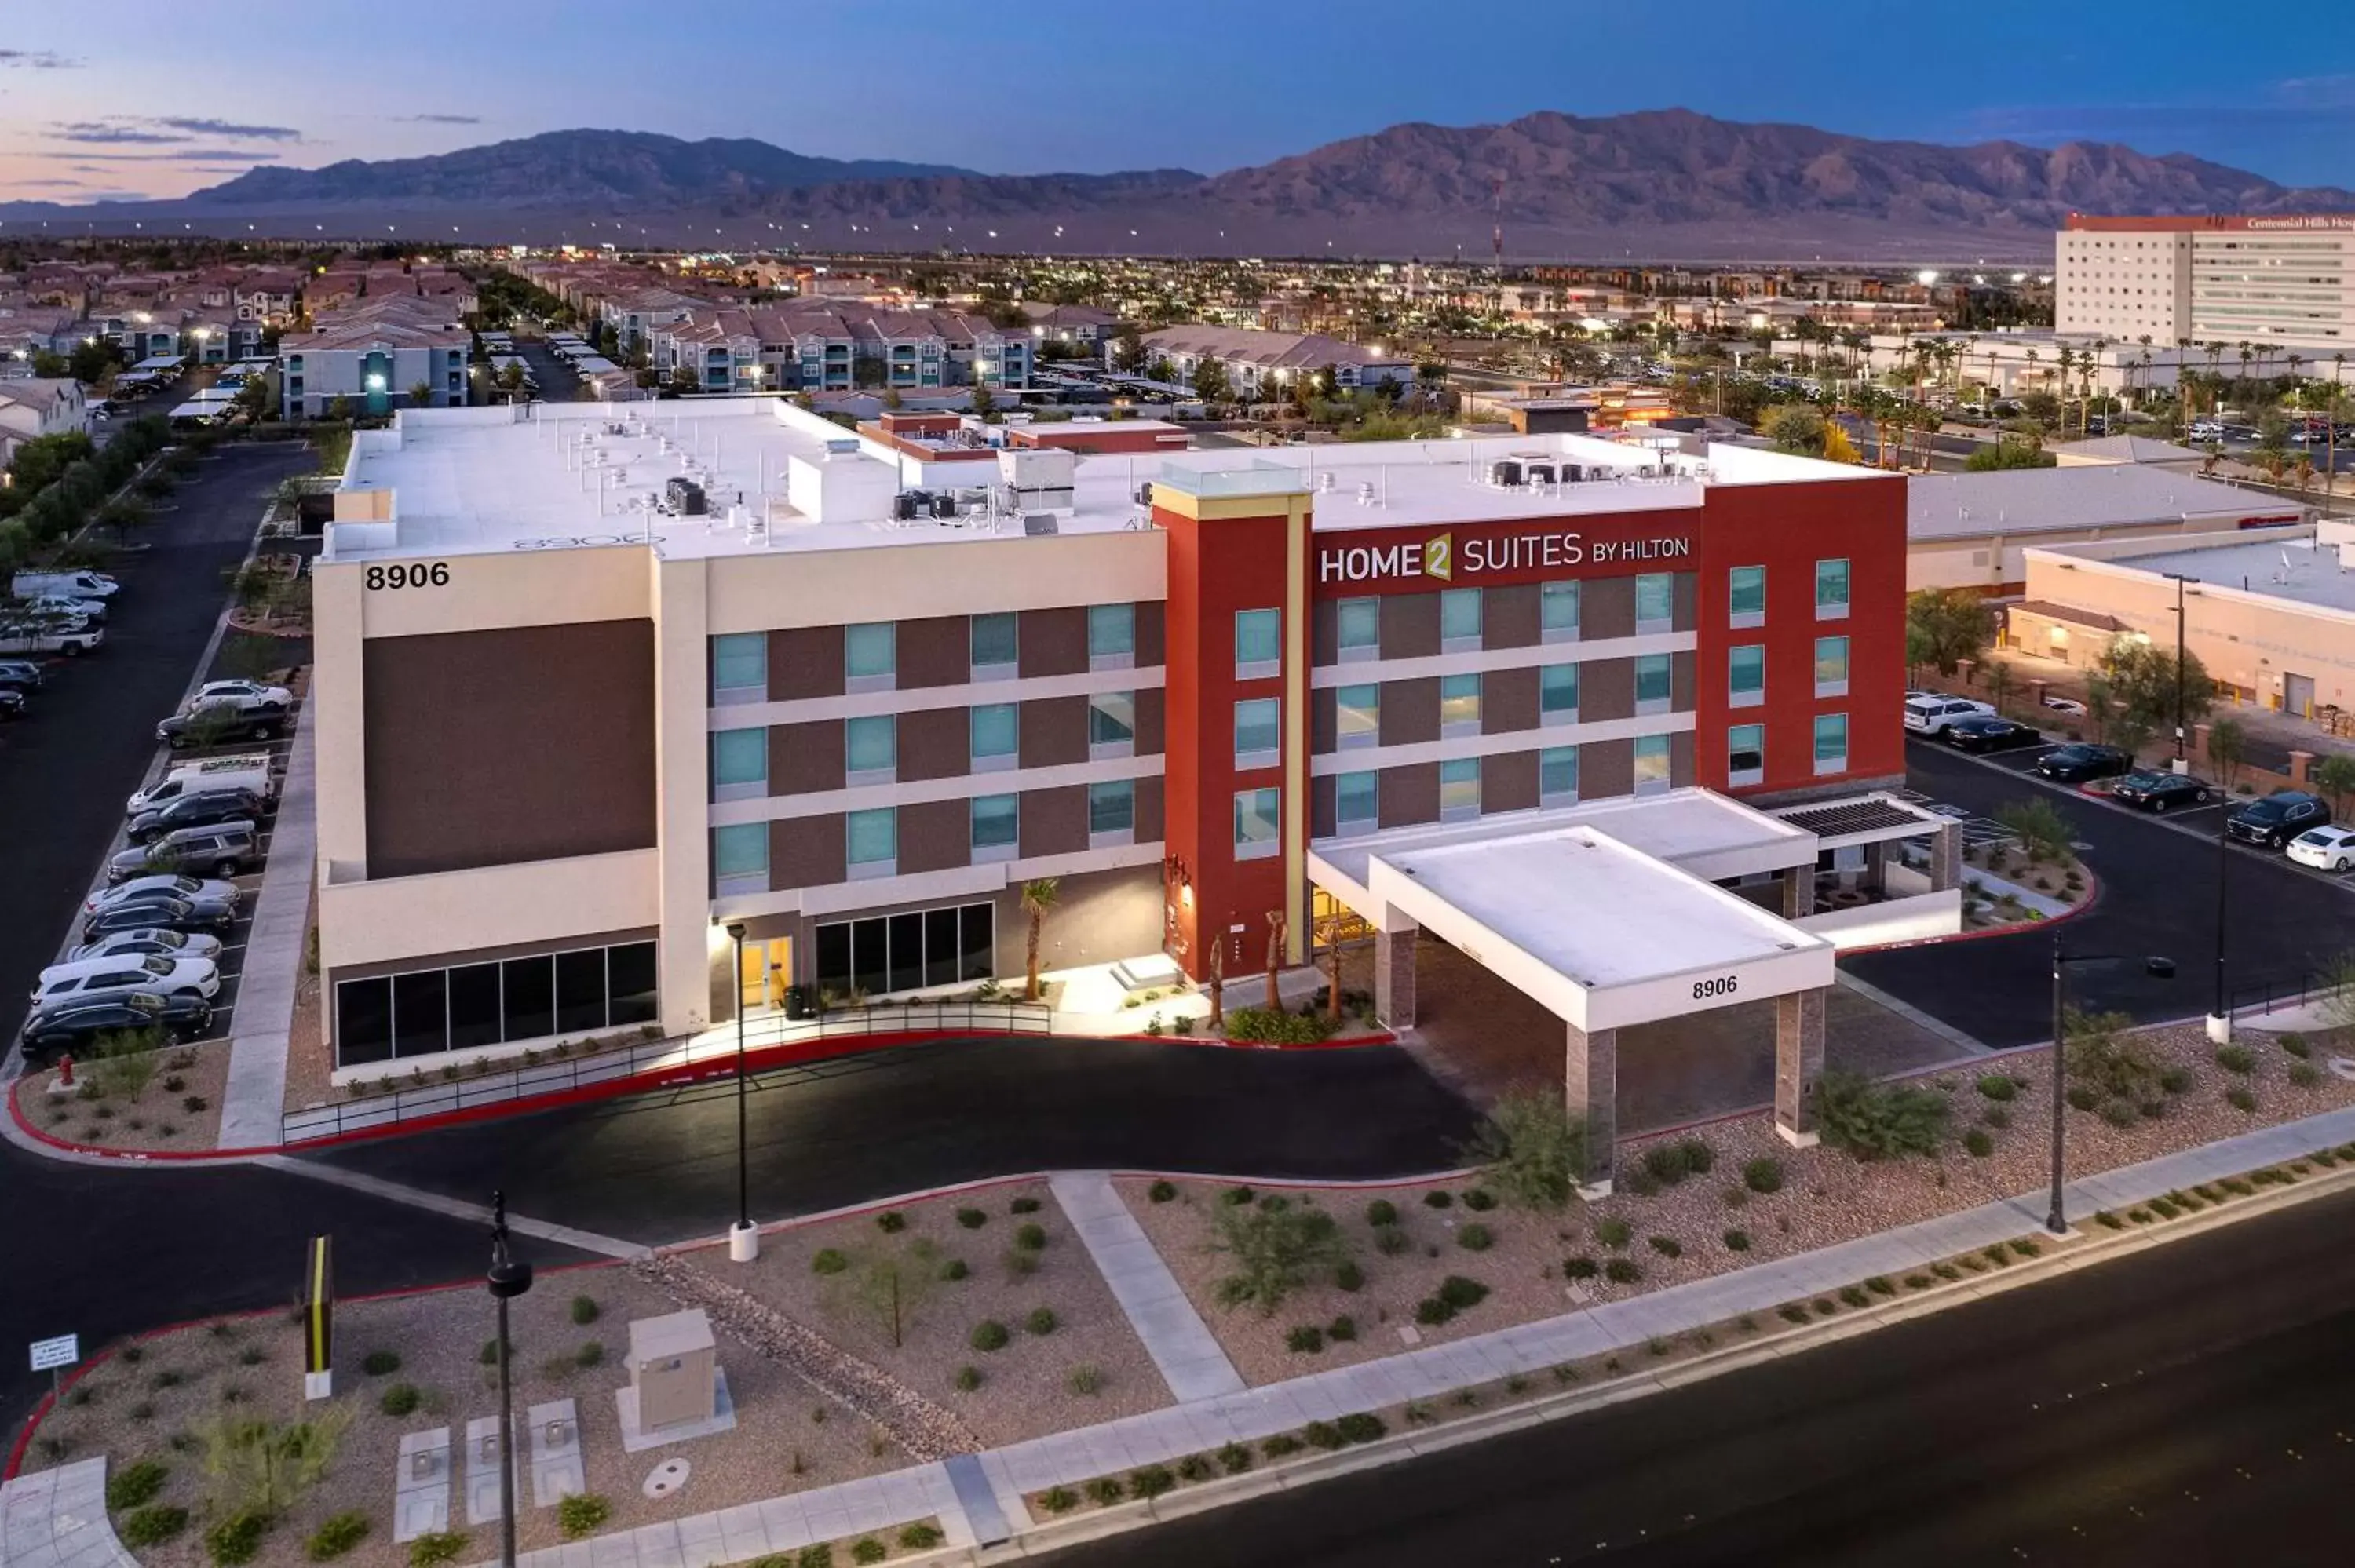 Property building, Bird's-eye View in Home2 Suites By Hilton Las Vegas Northwest